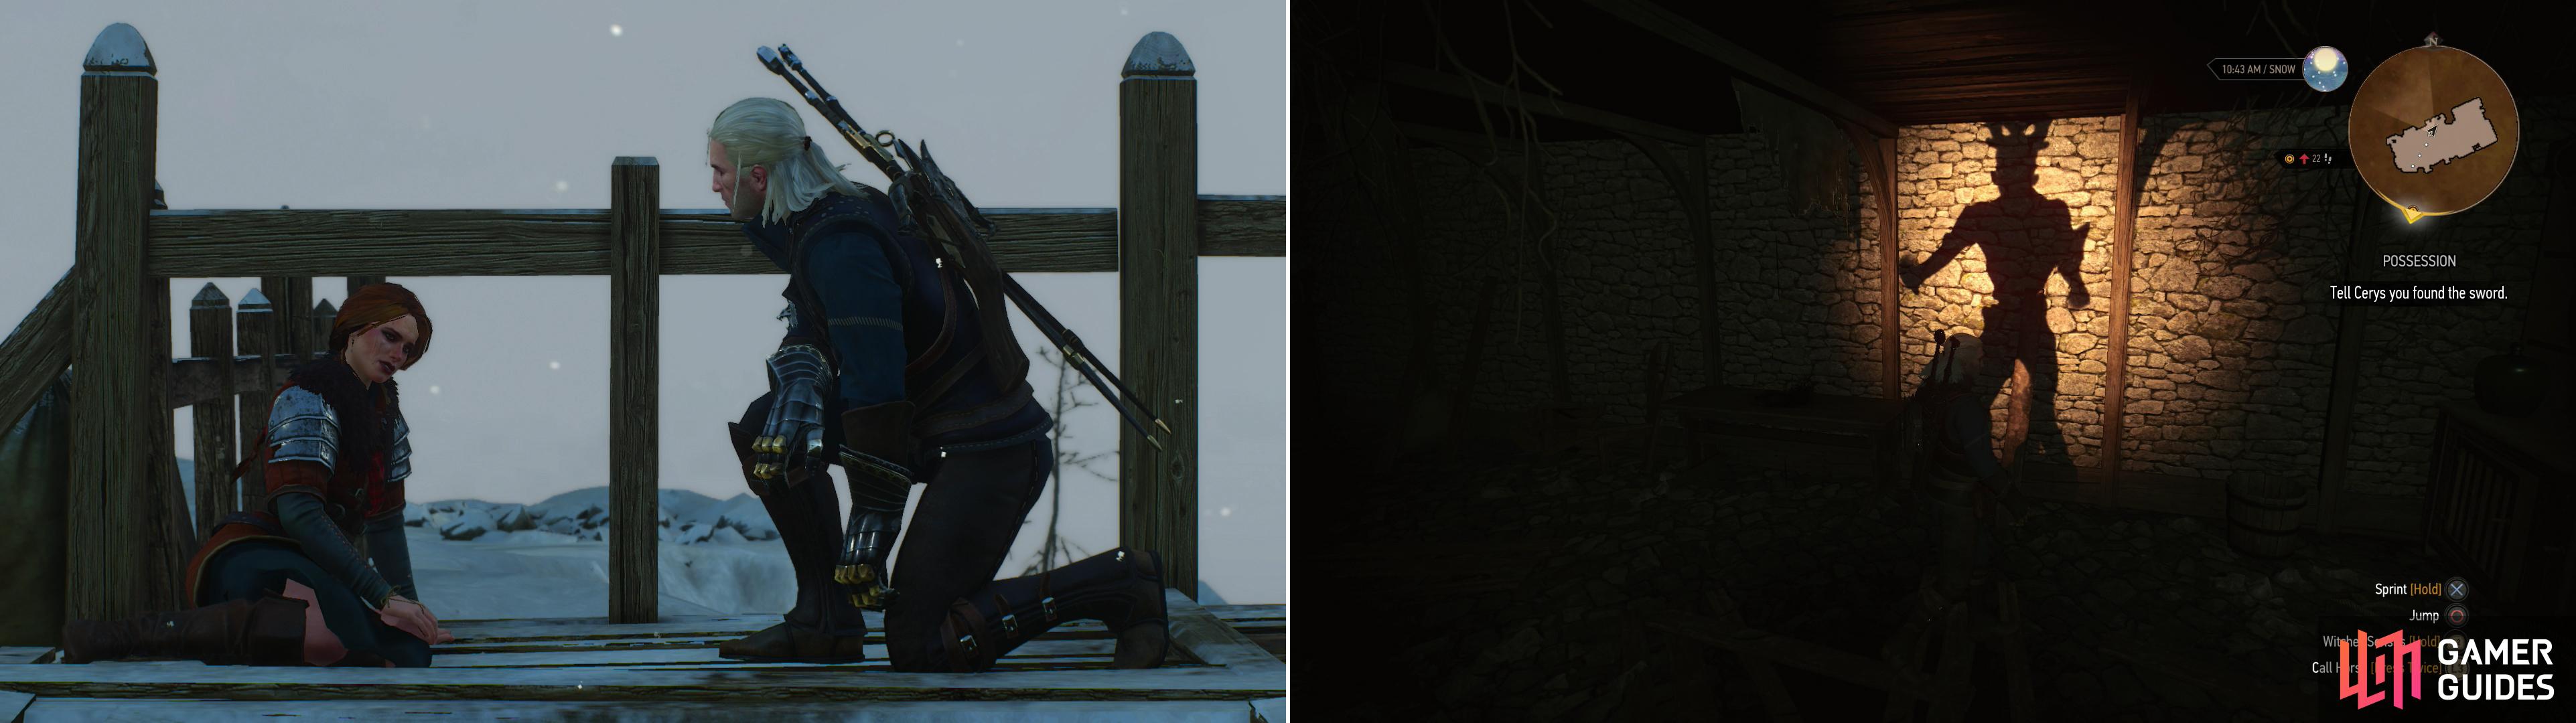 Geralt and Cerys chat after rescuing her from the Jarl’s old house (left). An ominous specter appears as Geralt recovers the old family sword Brokvar from the cellar (right).